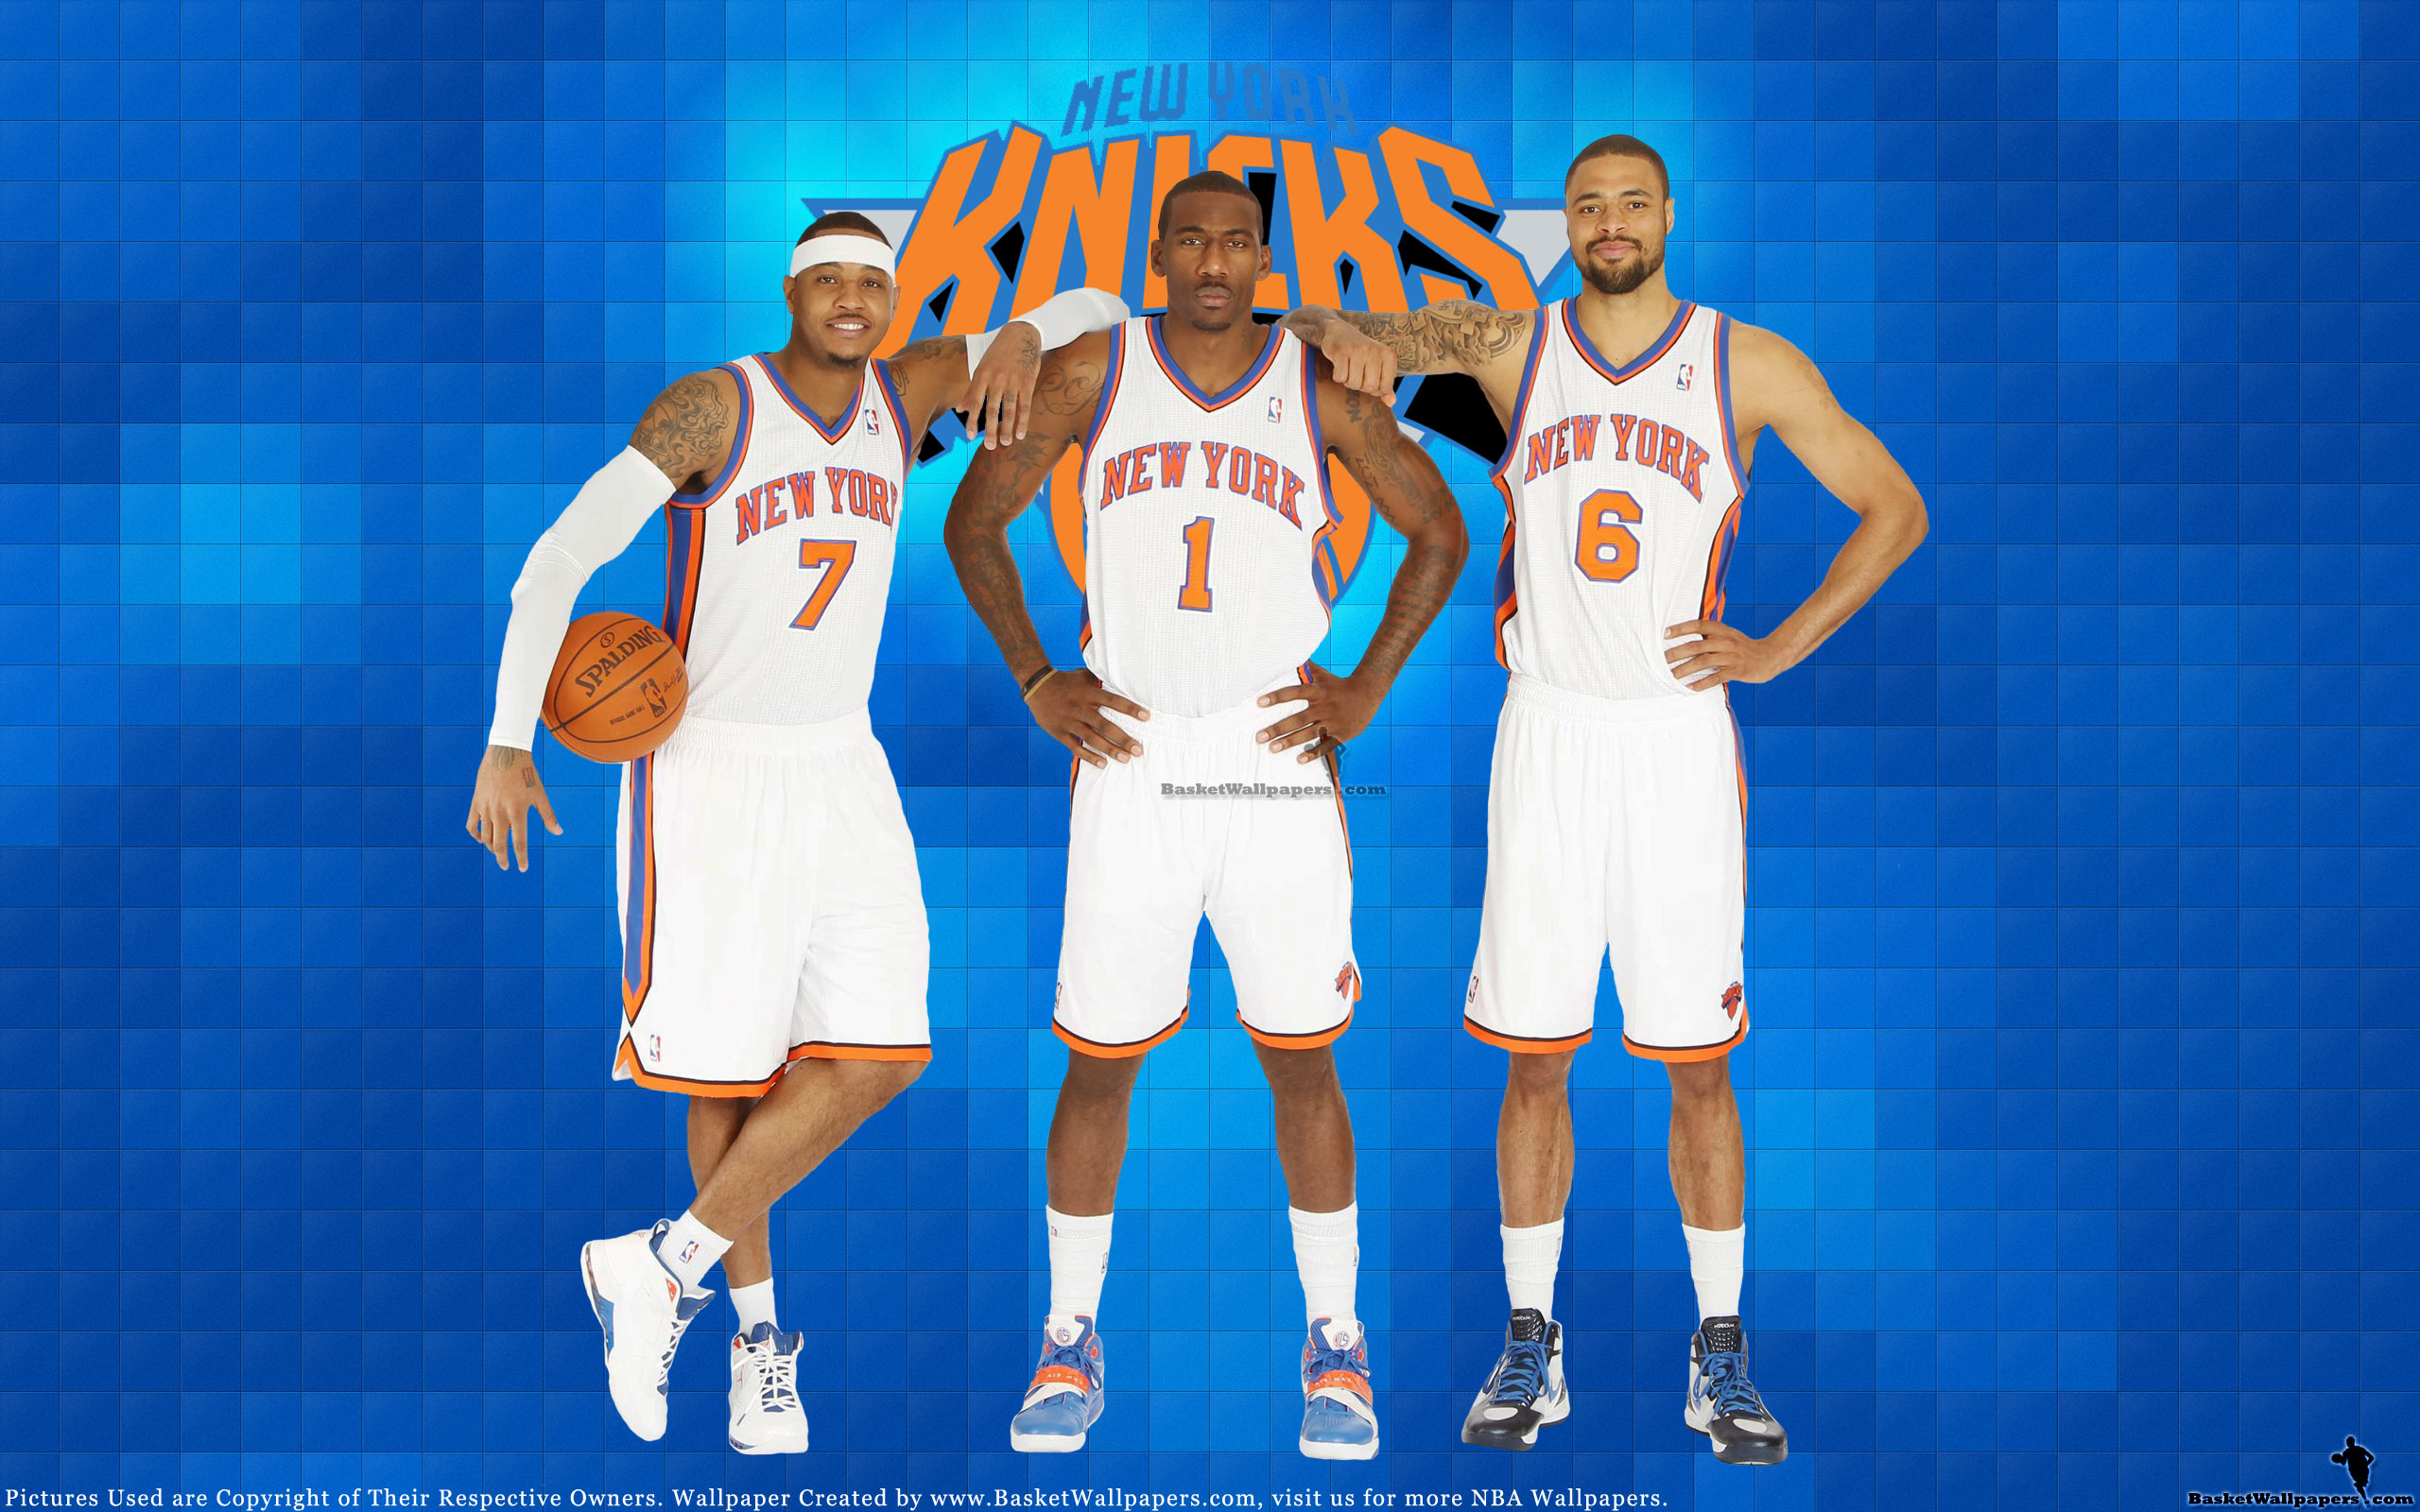 http://www.basketwallpapers.com/Images-10/Melo-Amare-Chandler-Knicks-2012-Wallpaper-BasketWallpapers.com-.jpg